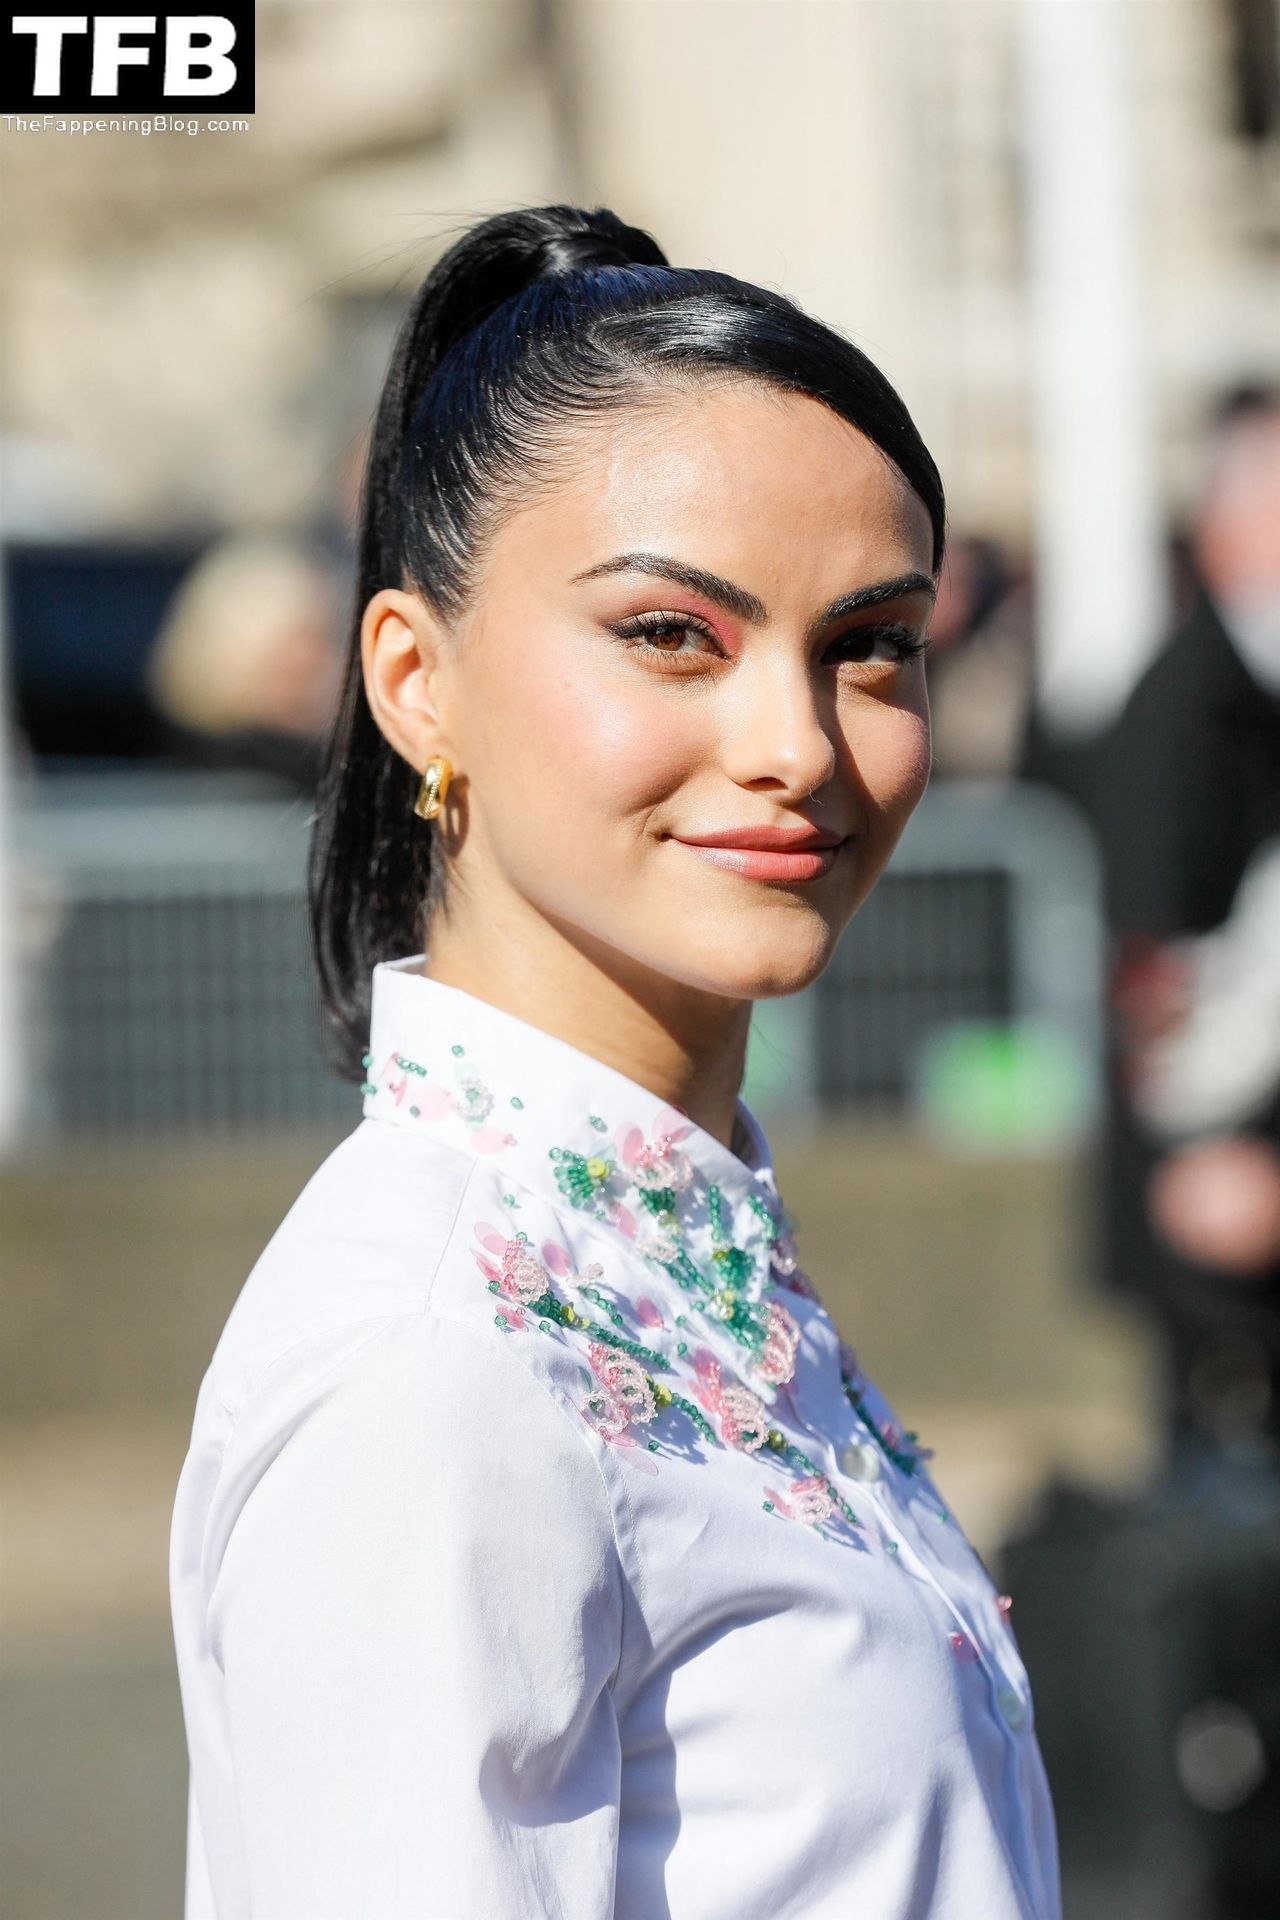 Camila-Mendes-Sexy-The-Fappening-Blog-94.jpg